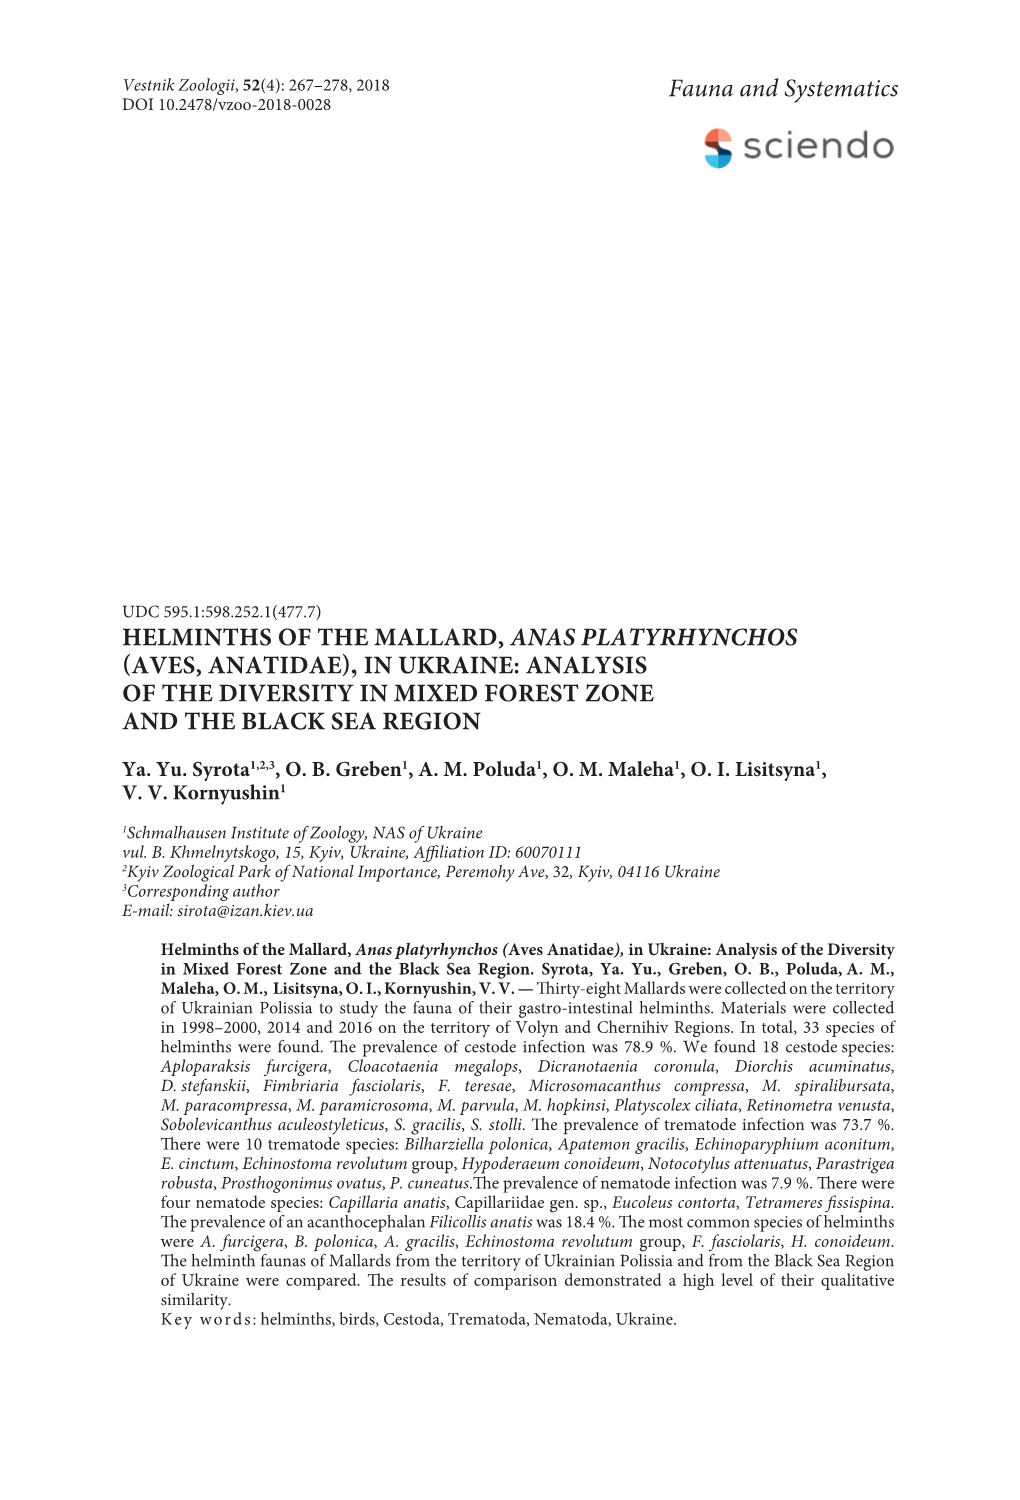 Helminths of the Mallard, Anas Platyrhynchos (Aves, Anatidae), in Ukraine: Analysis of the Diversity in Mixed Forest Zone and the Black Sea Region